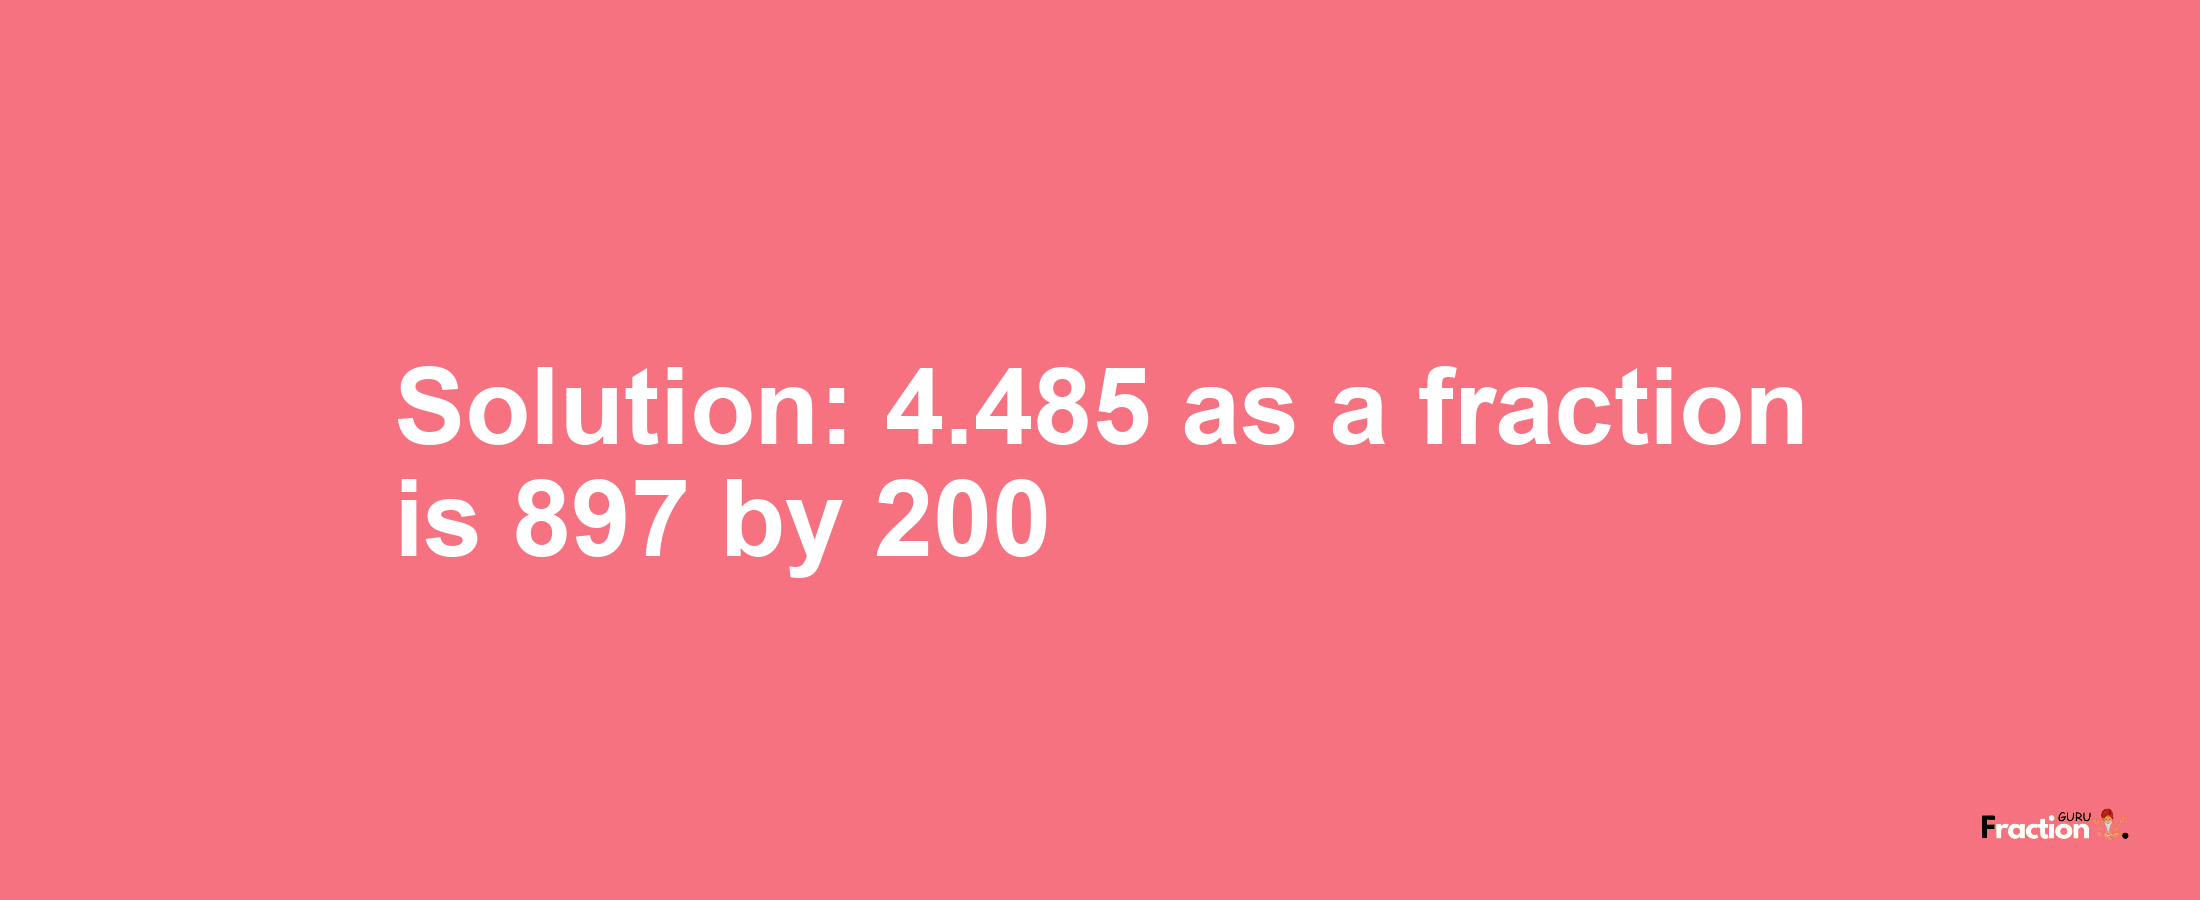 Solution:4.485 as a fraction is 897/200